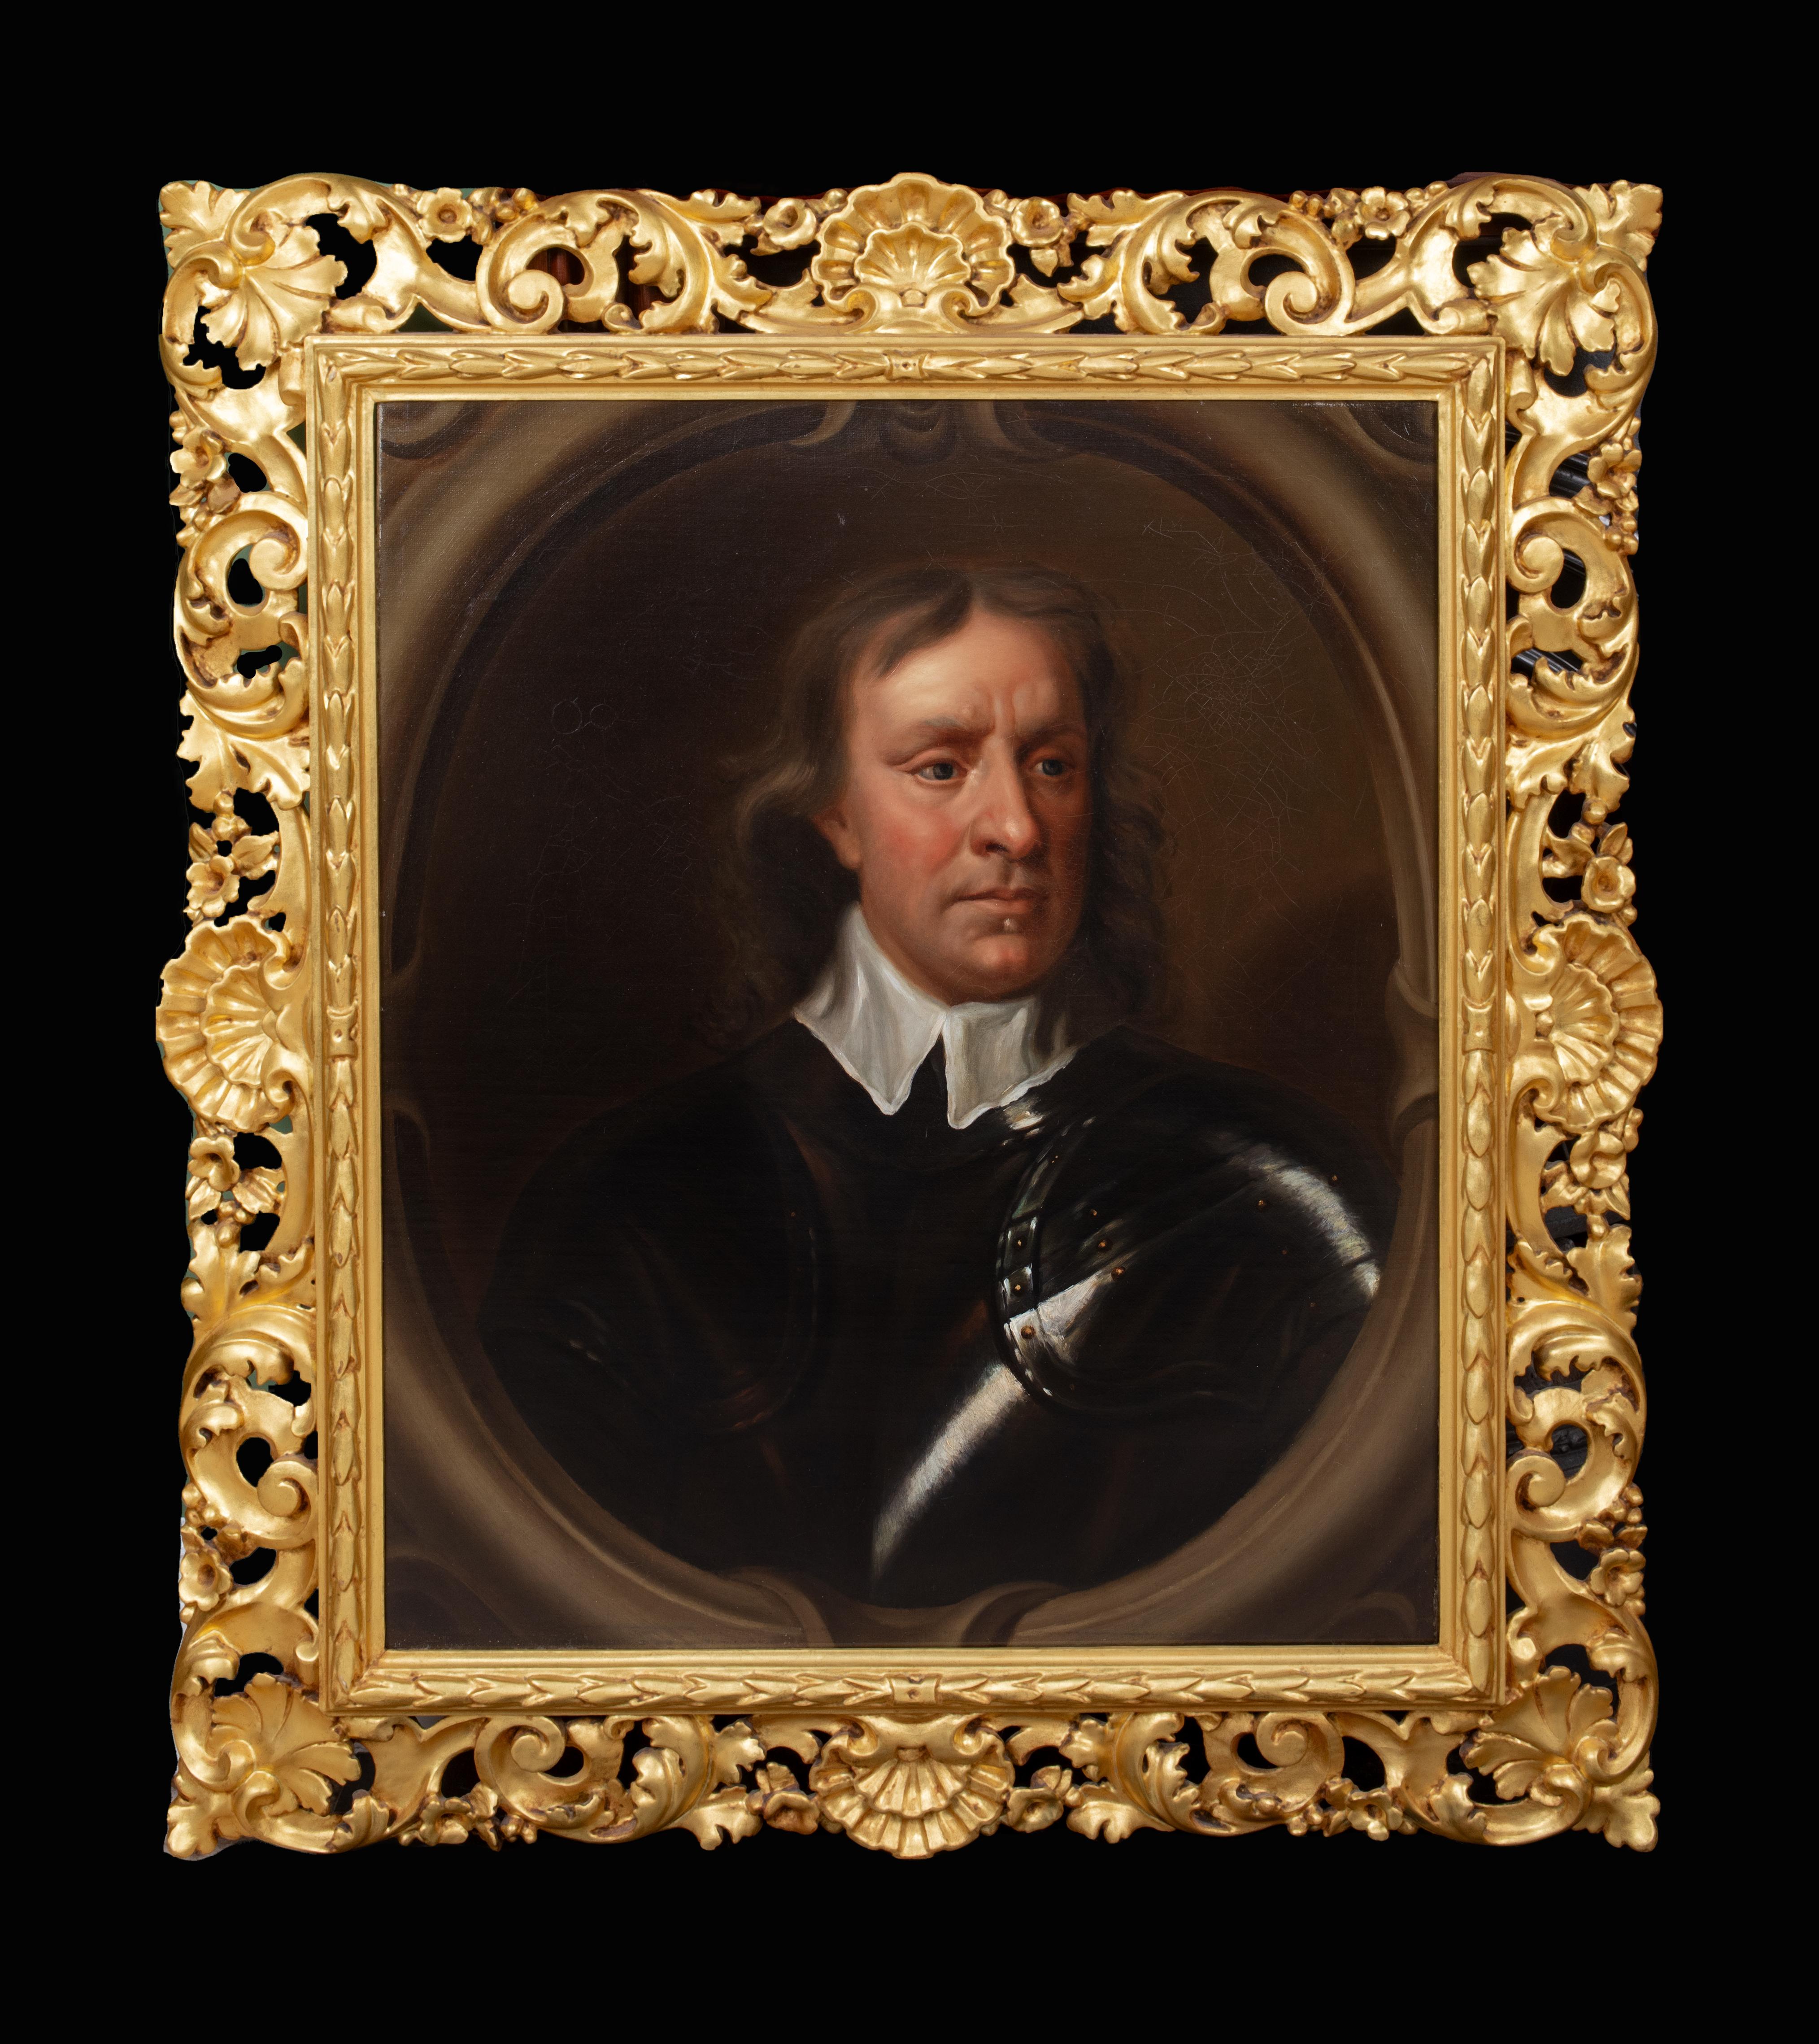 Porträt von Sir Oliver Cromwell (1599-1658) SIR PETER LELY (1599-1658) – Painting von Sir Peter Lely